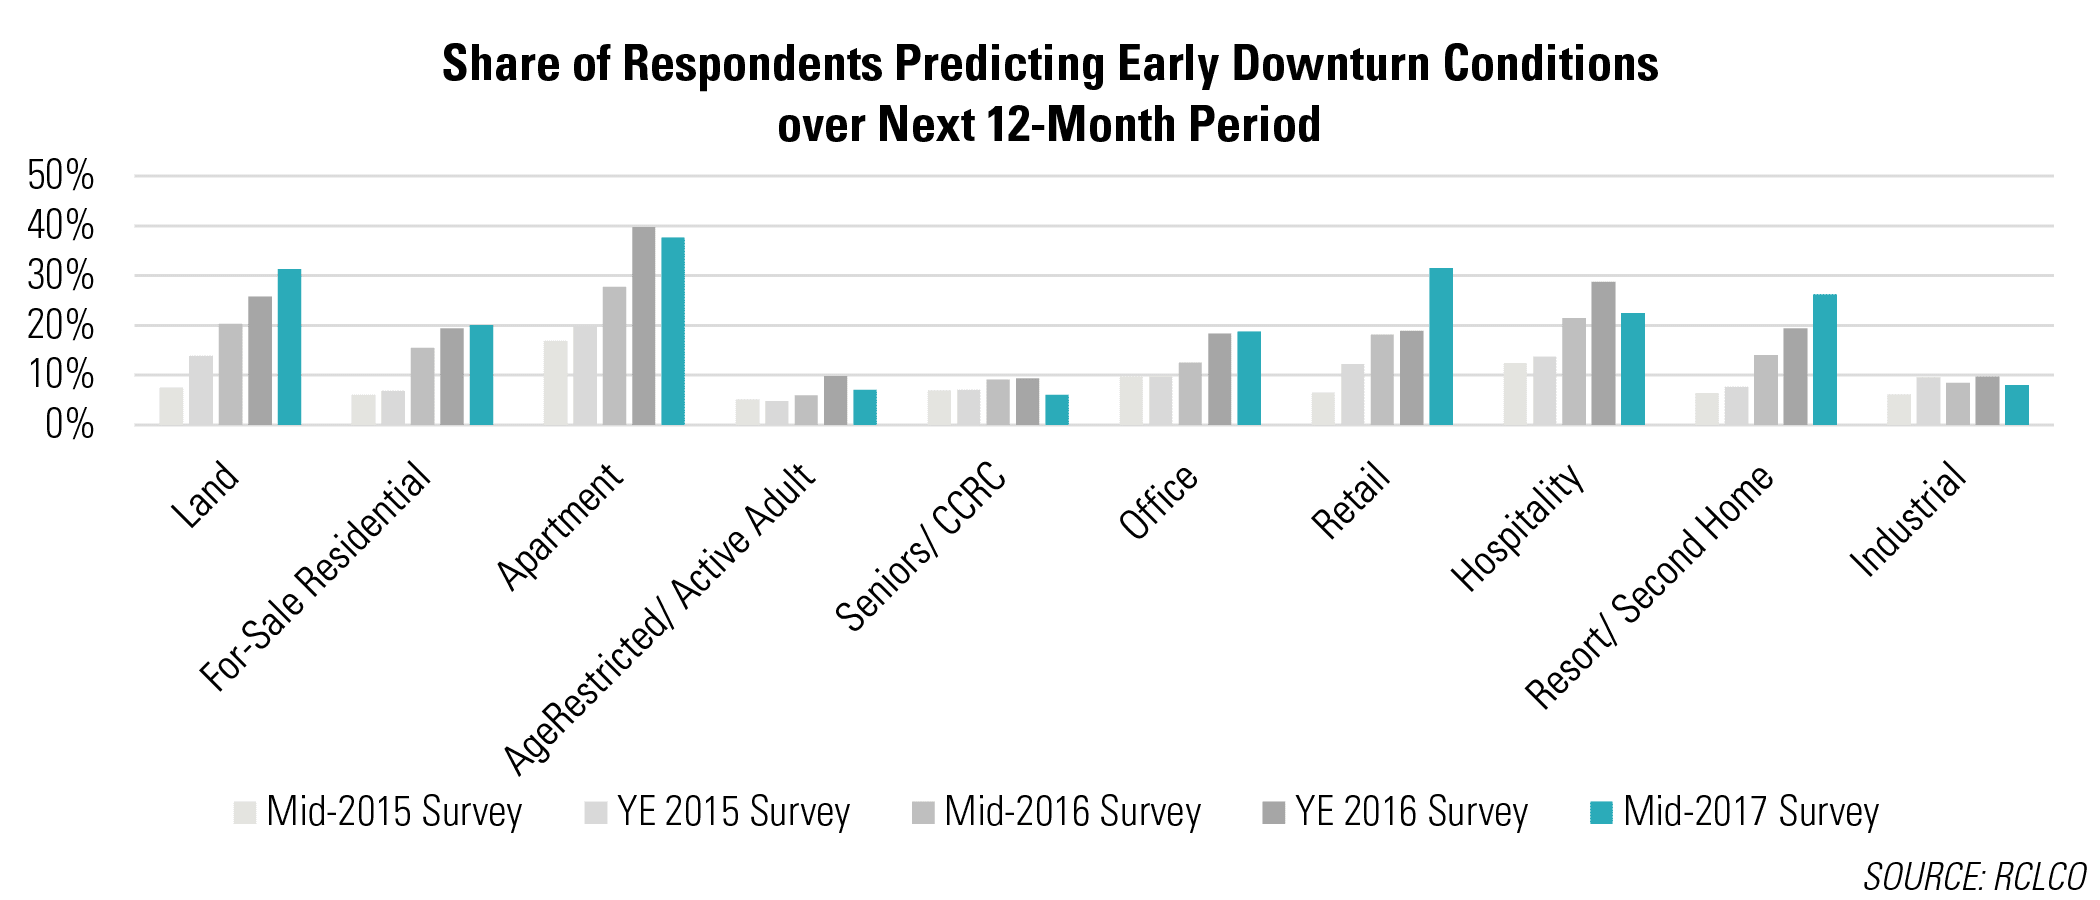 Share of Respondents Predicting Early Downturn Conditions Over Next 12-Month Period